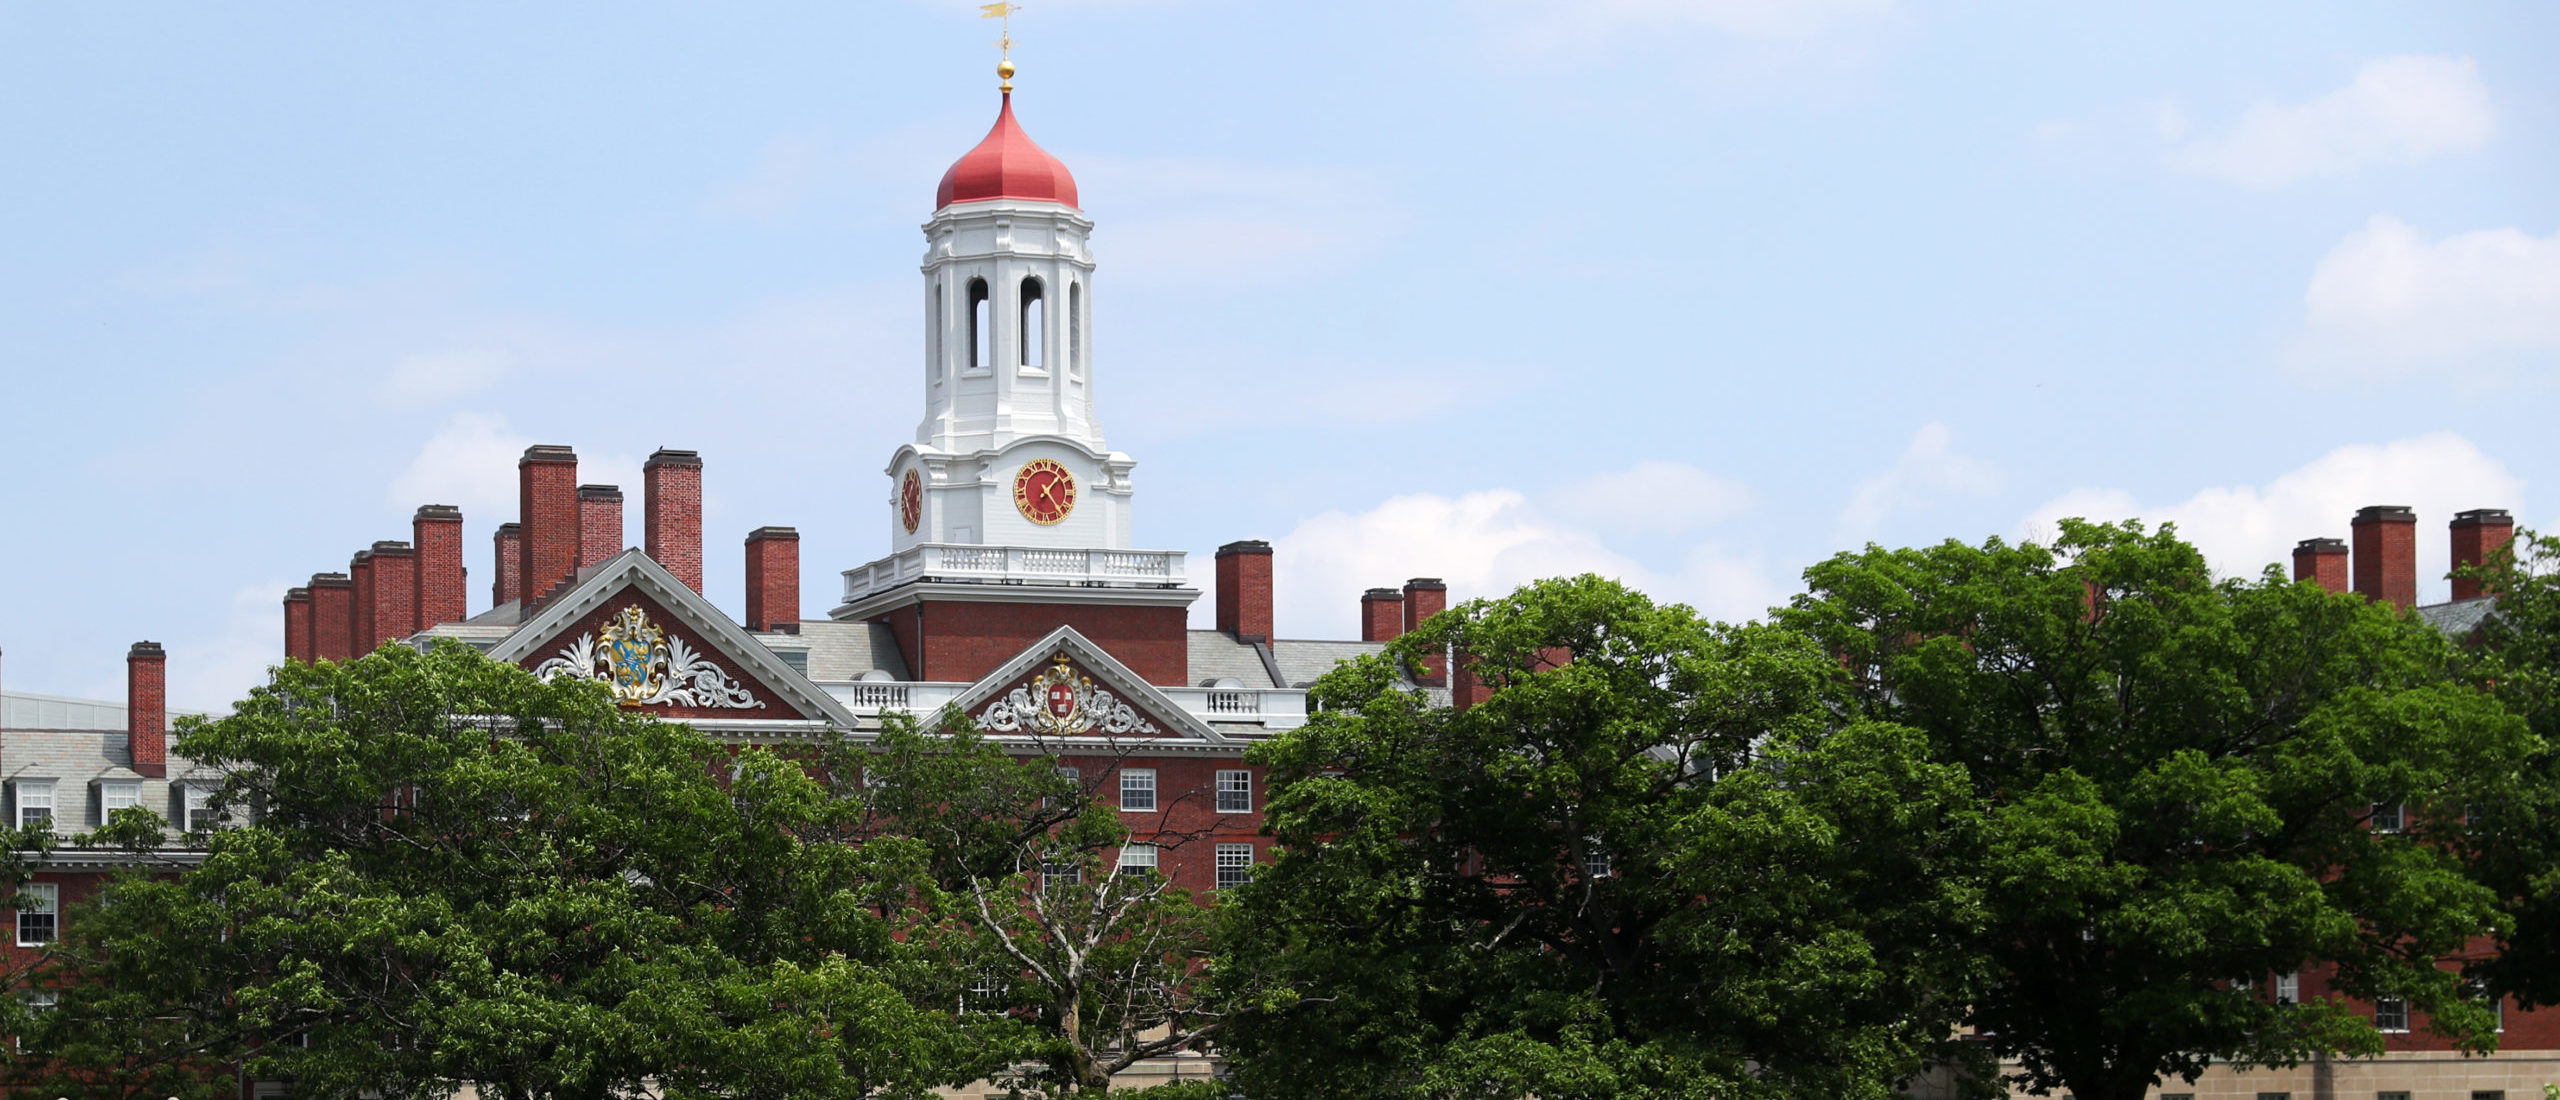 CAMBRIDGE, MASSACHUSETTS - JULY 08: A view of the campus of Harvard University on July 08, 2020 in Cambridge, Massachusetts. (Photo by Maddie Meyer/Getty Images)